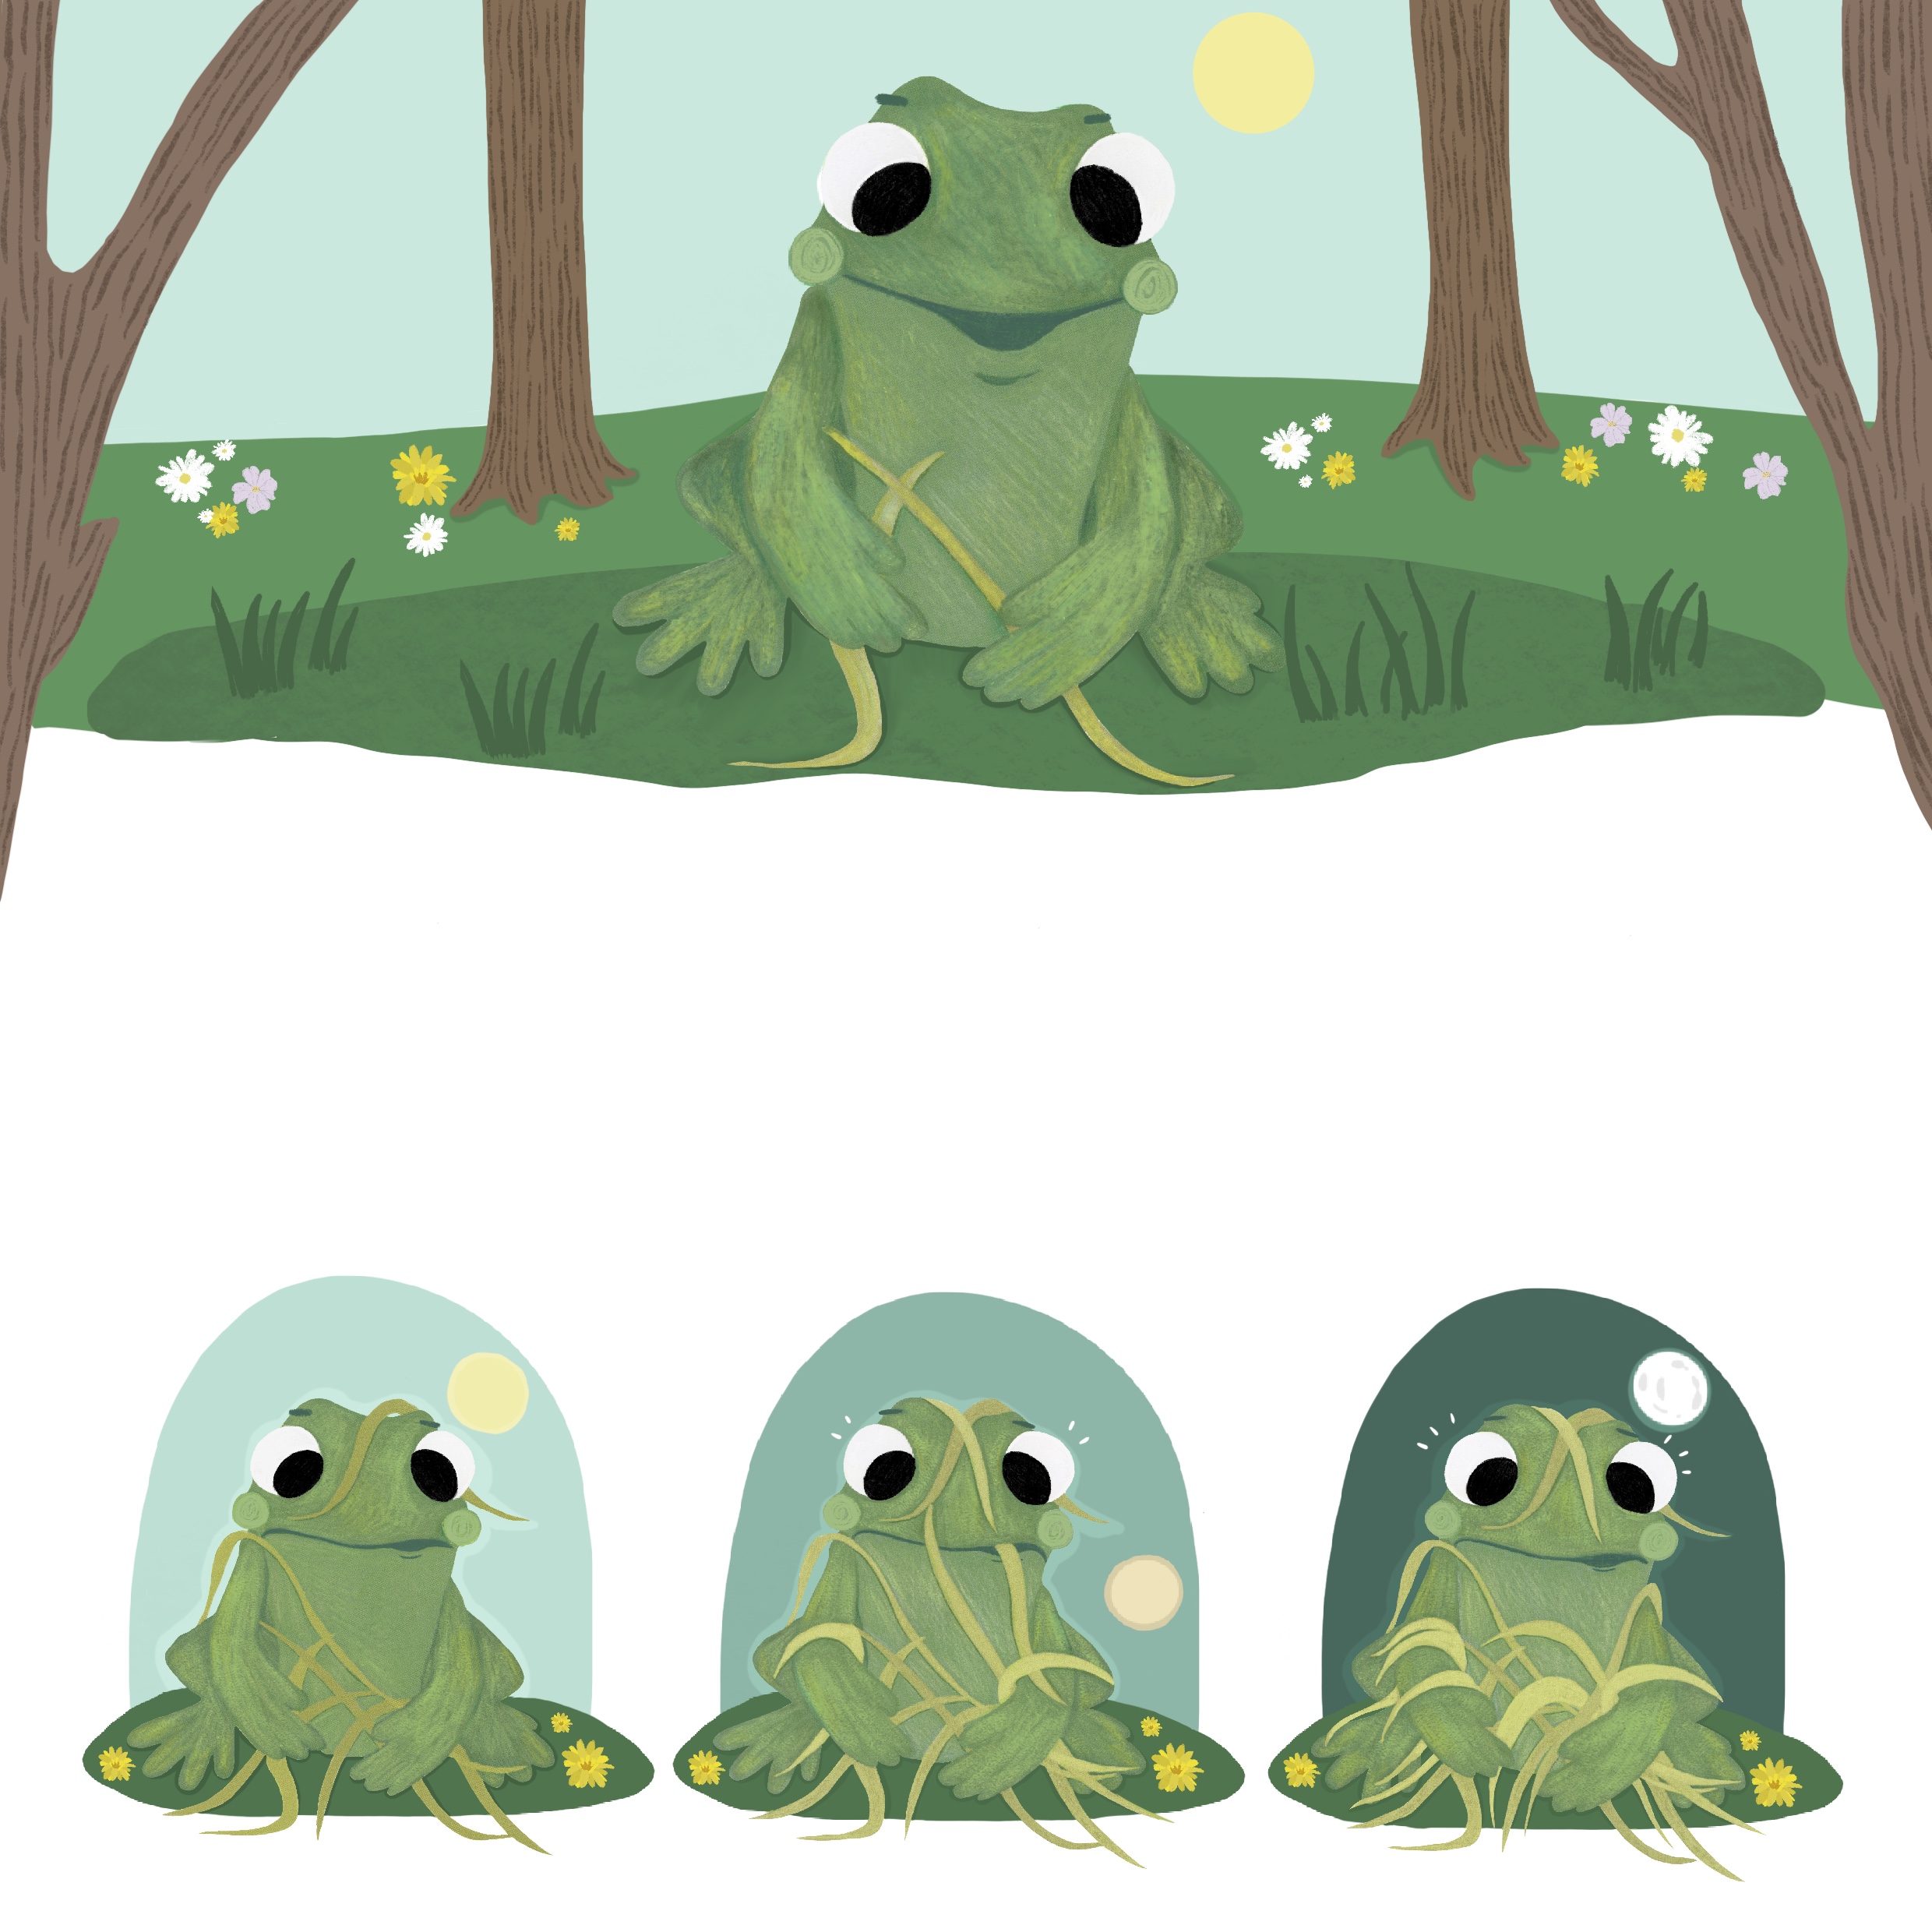 Pog the frog struggling to build the treehouses structure out of straw. The images showing the stages of Pog's struggle.